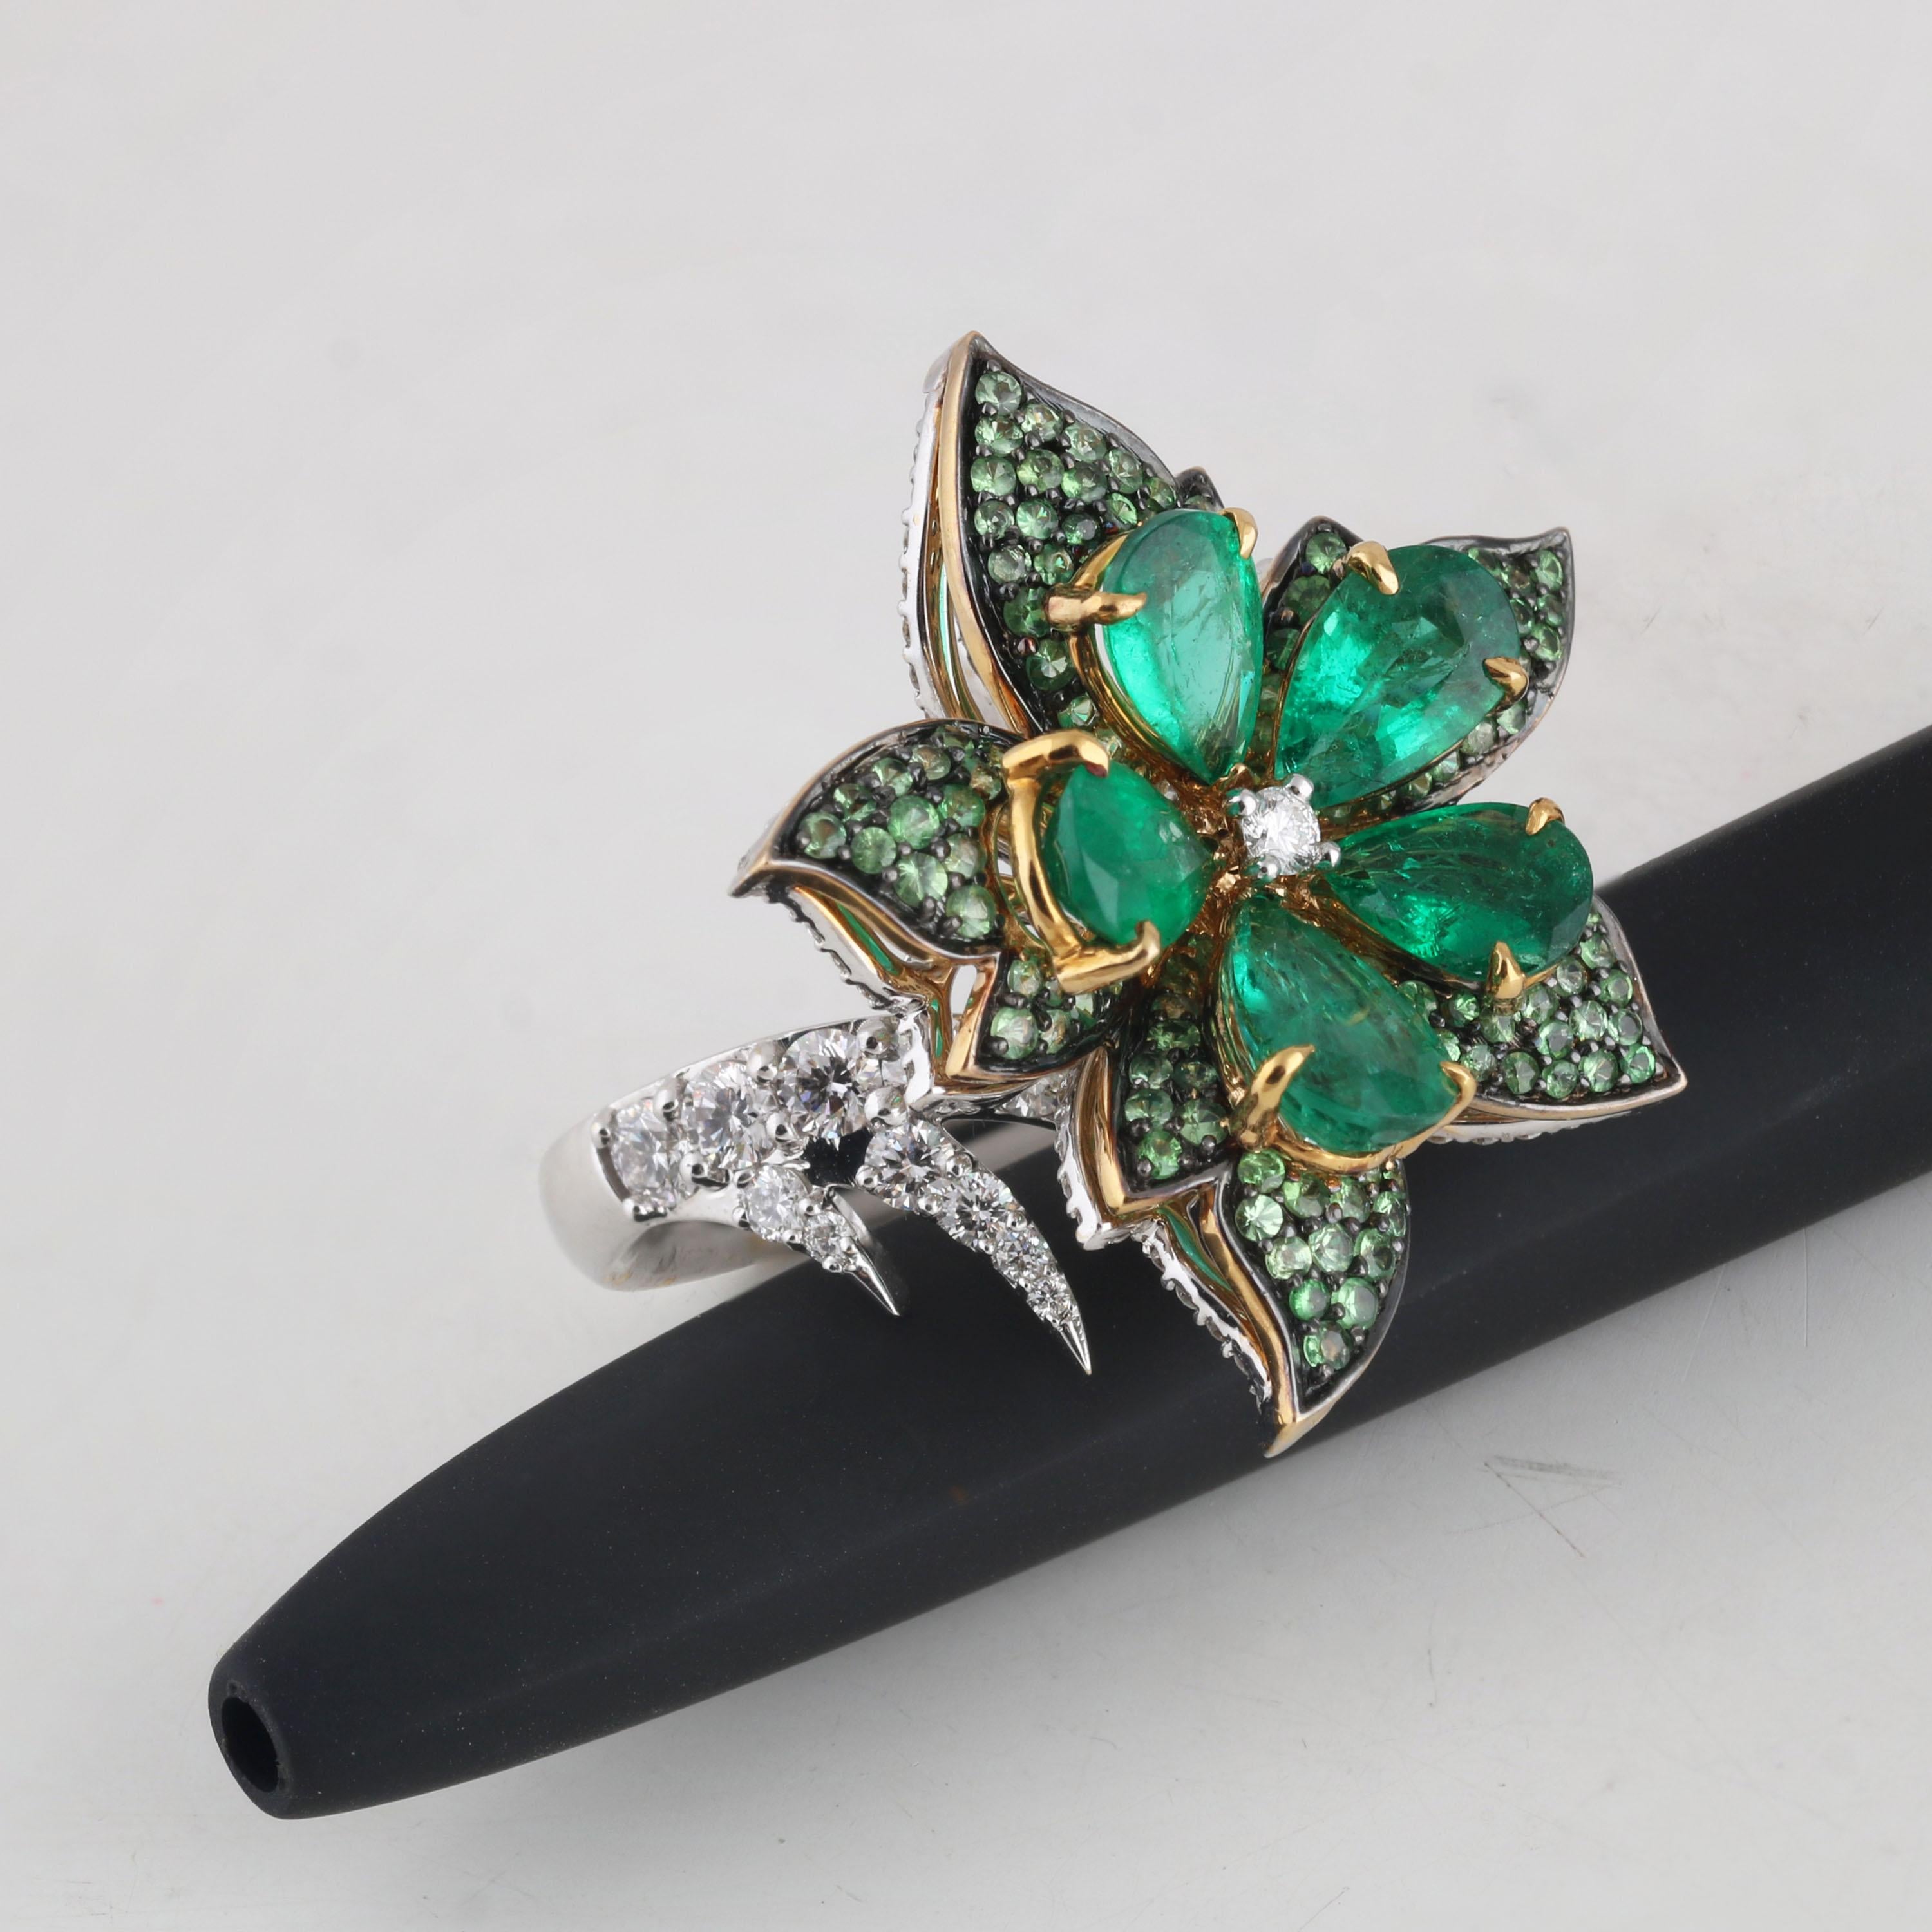 Contemporary Studio Rêves Emeralds and Diamonds Floral Cocktail Ring in 18 Karat Gold For Sale